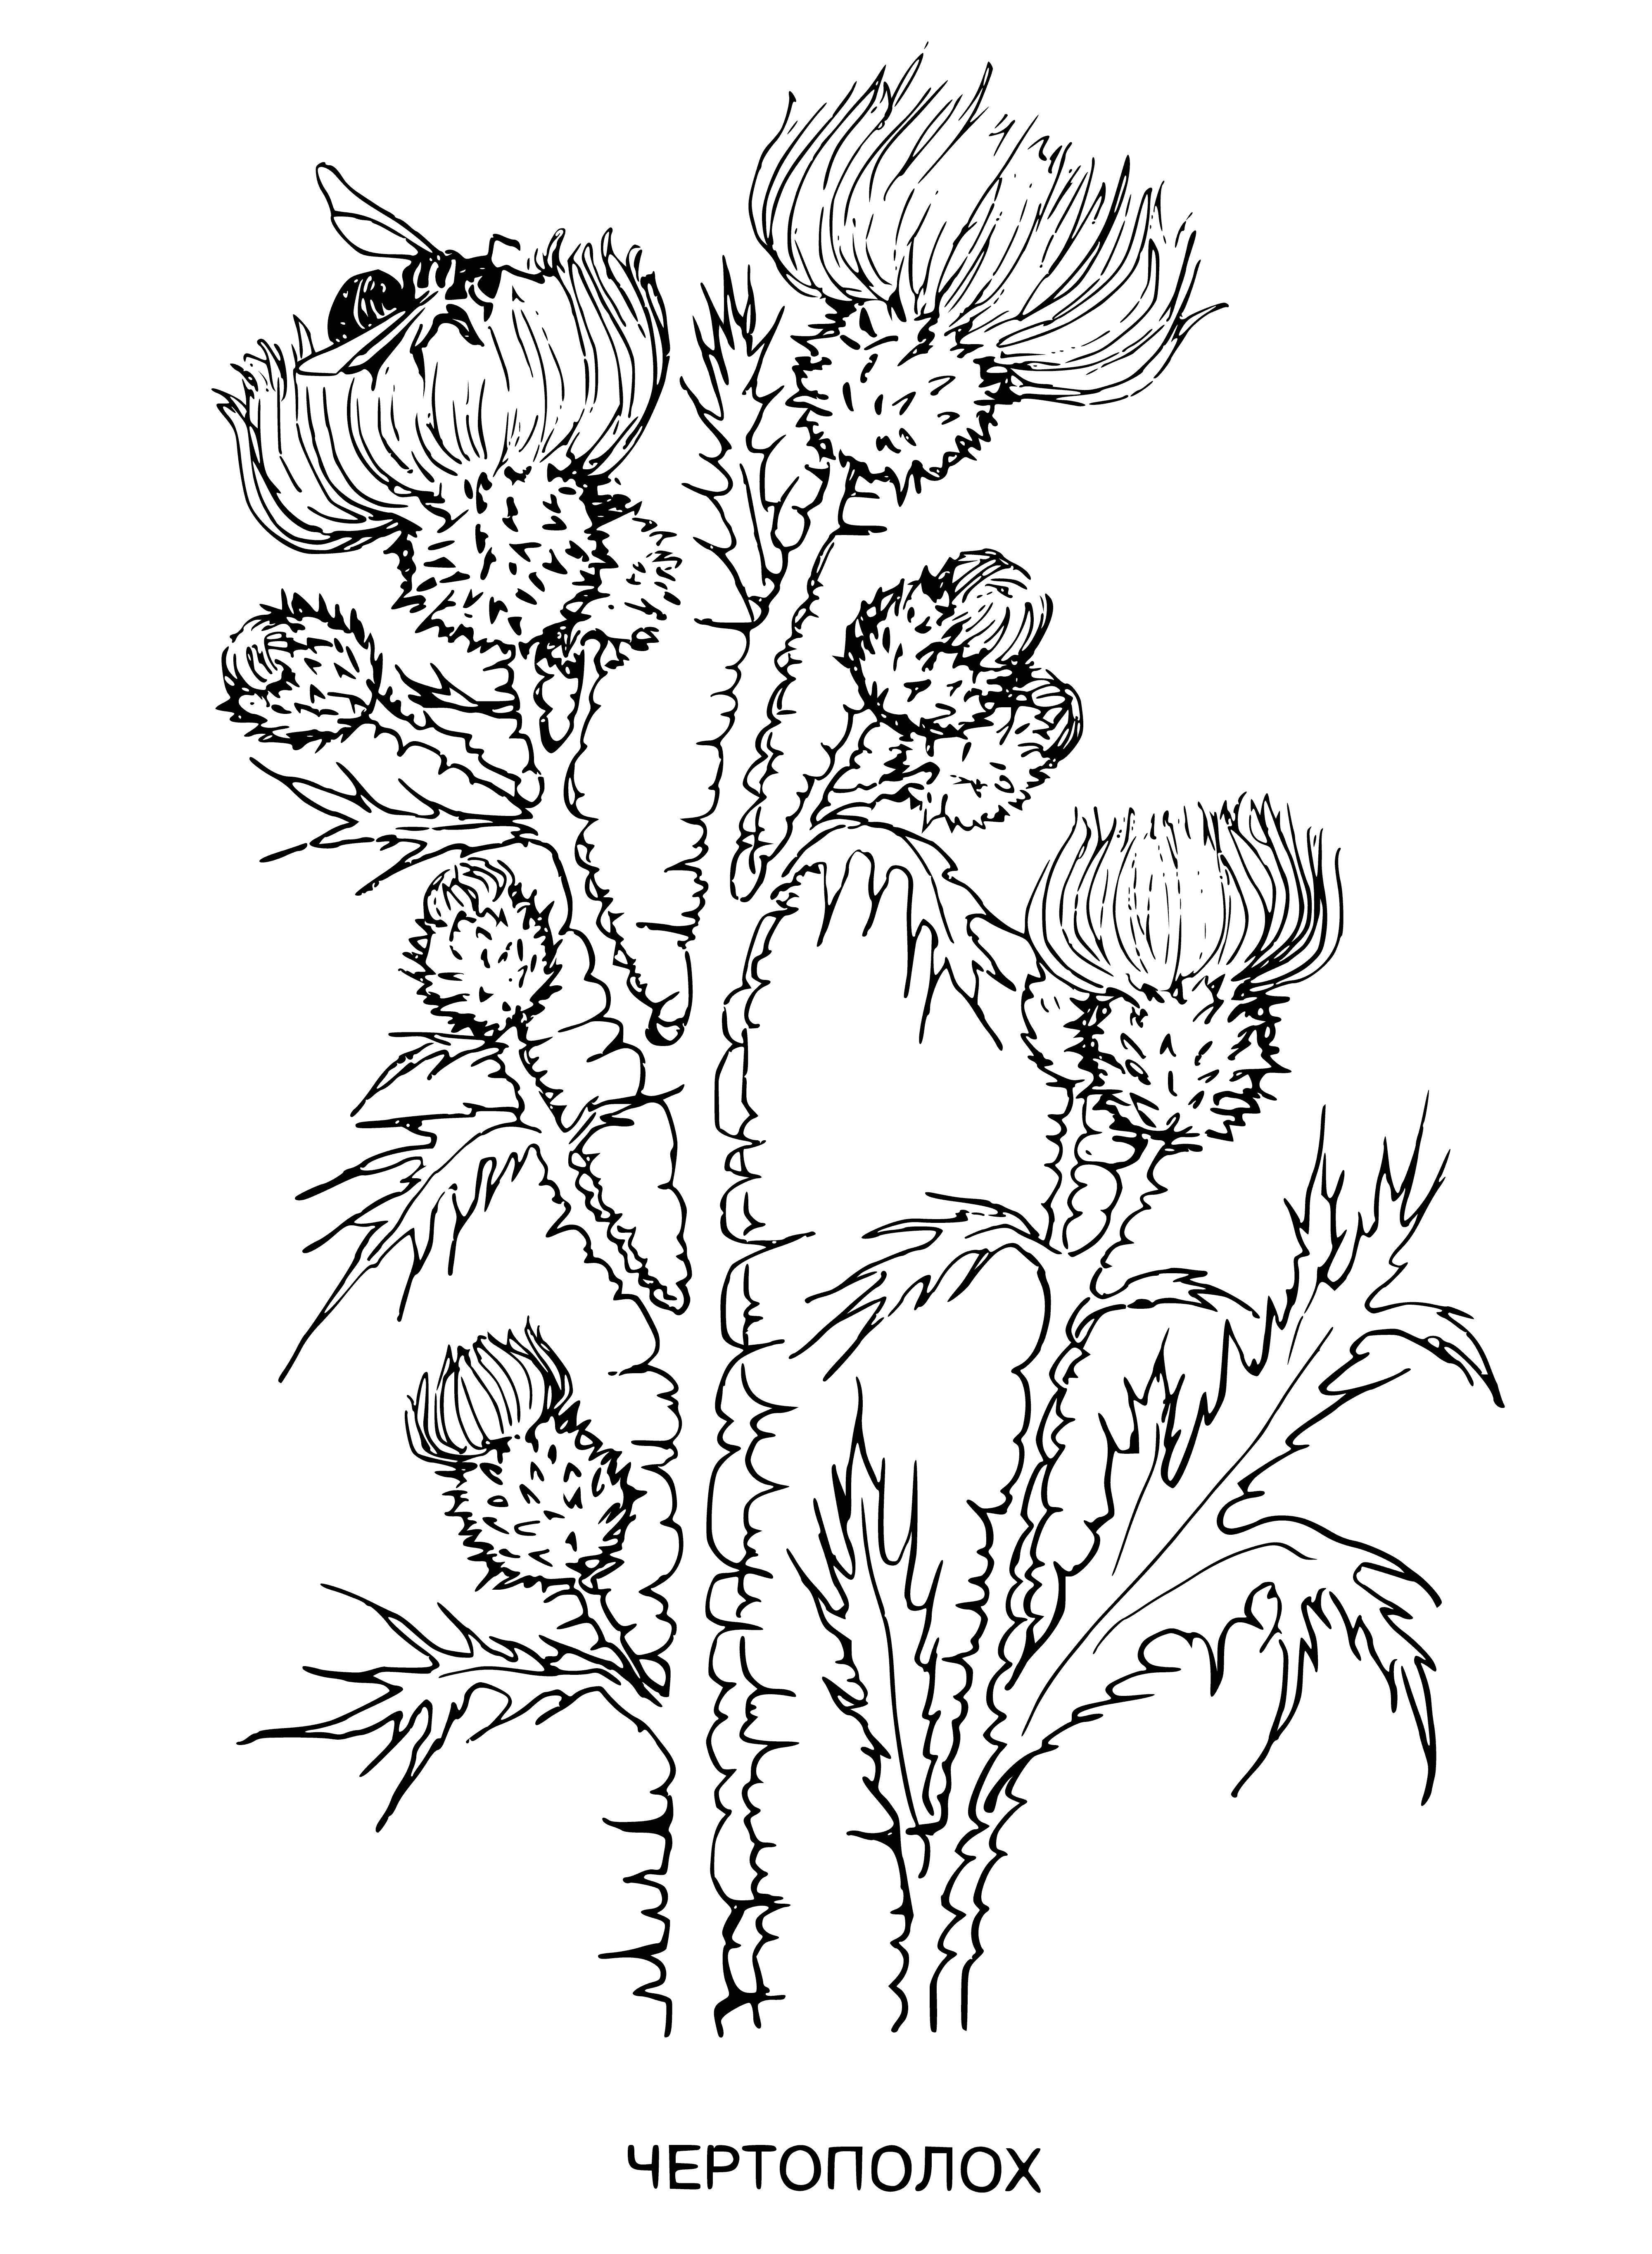 coloring page: Coloring page of a thistle with purple flower. Member of Asteraceae family. #flowers #coloringpage #thistle